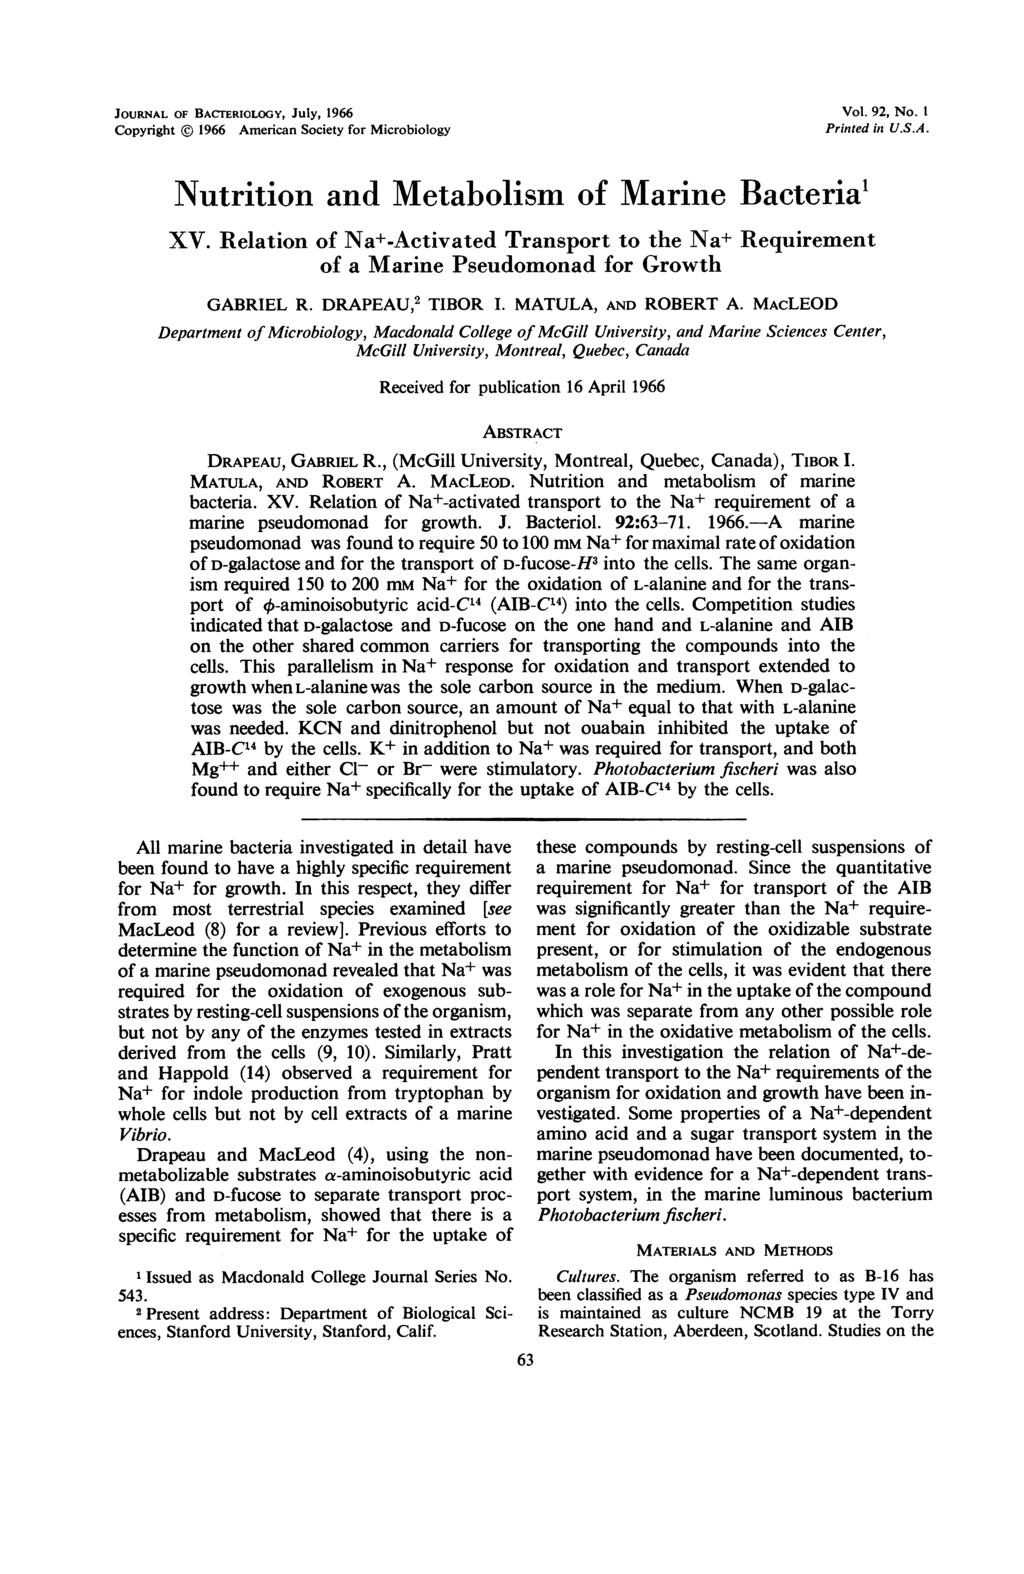 JOURNAL OF BACTERIOLOGY, July, 1966 Copyright 1966 American Society for Microbiology Vol. 92, No. I Printed in U.S.A. Nutrition and Metabolism of Marine Bacteria1 XV.